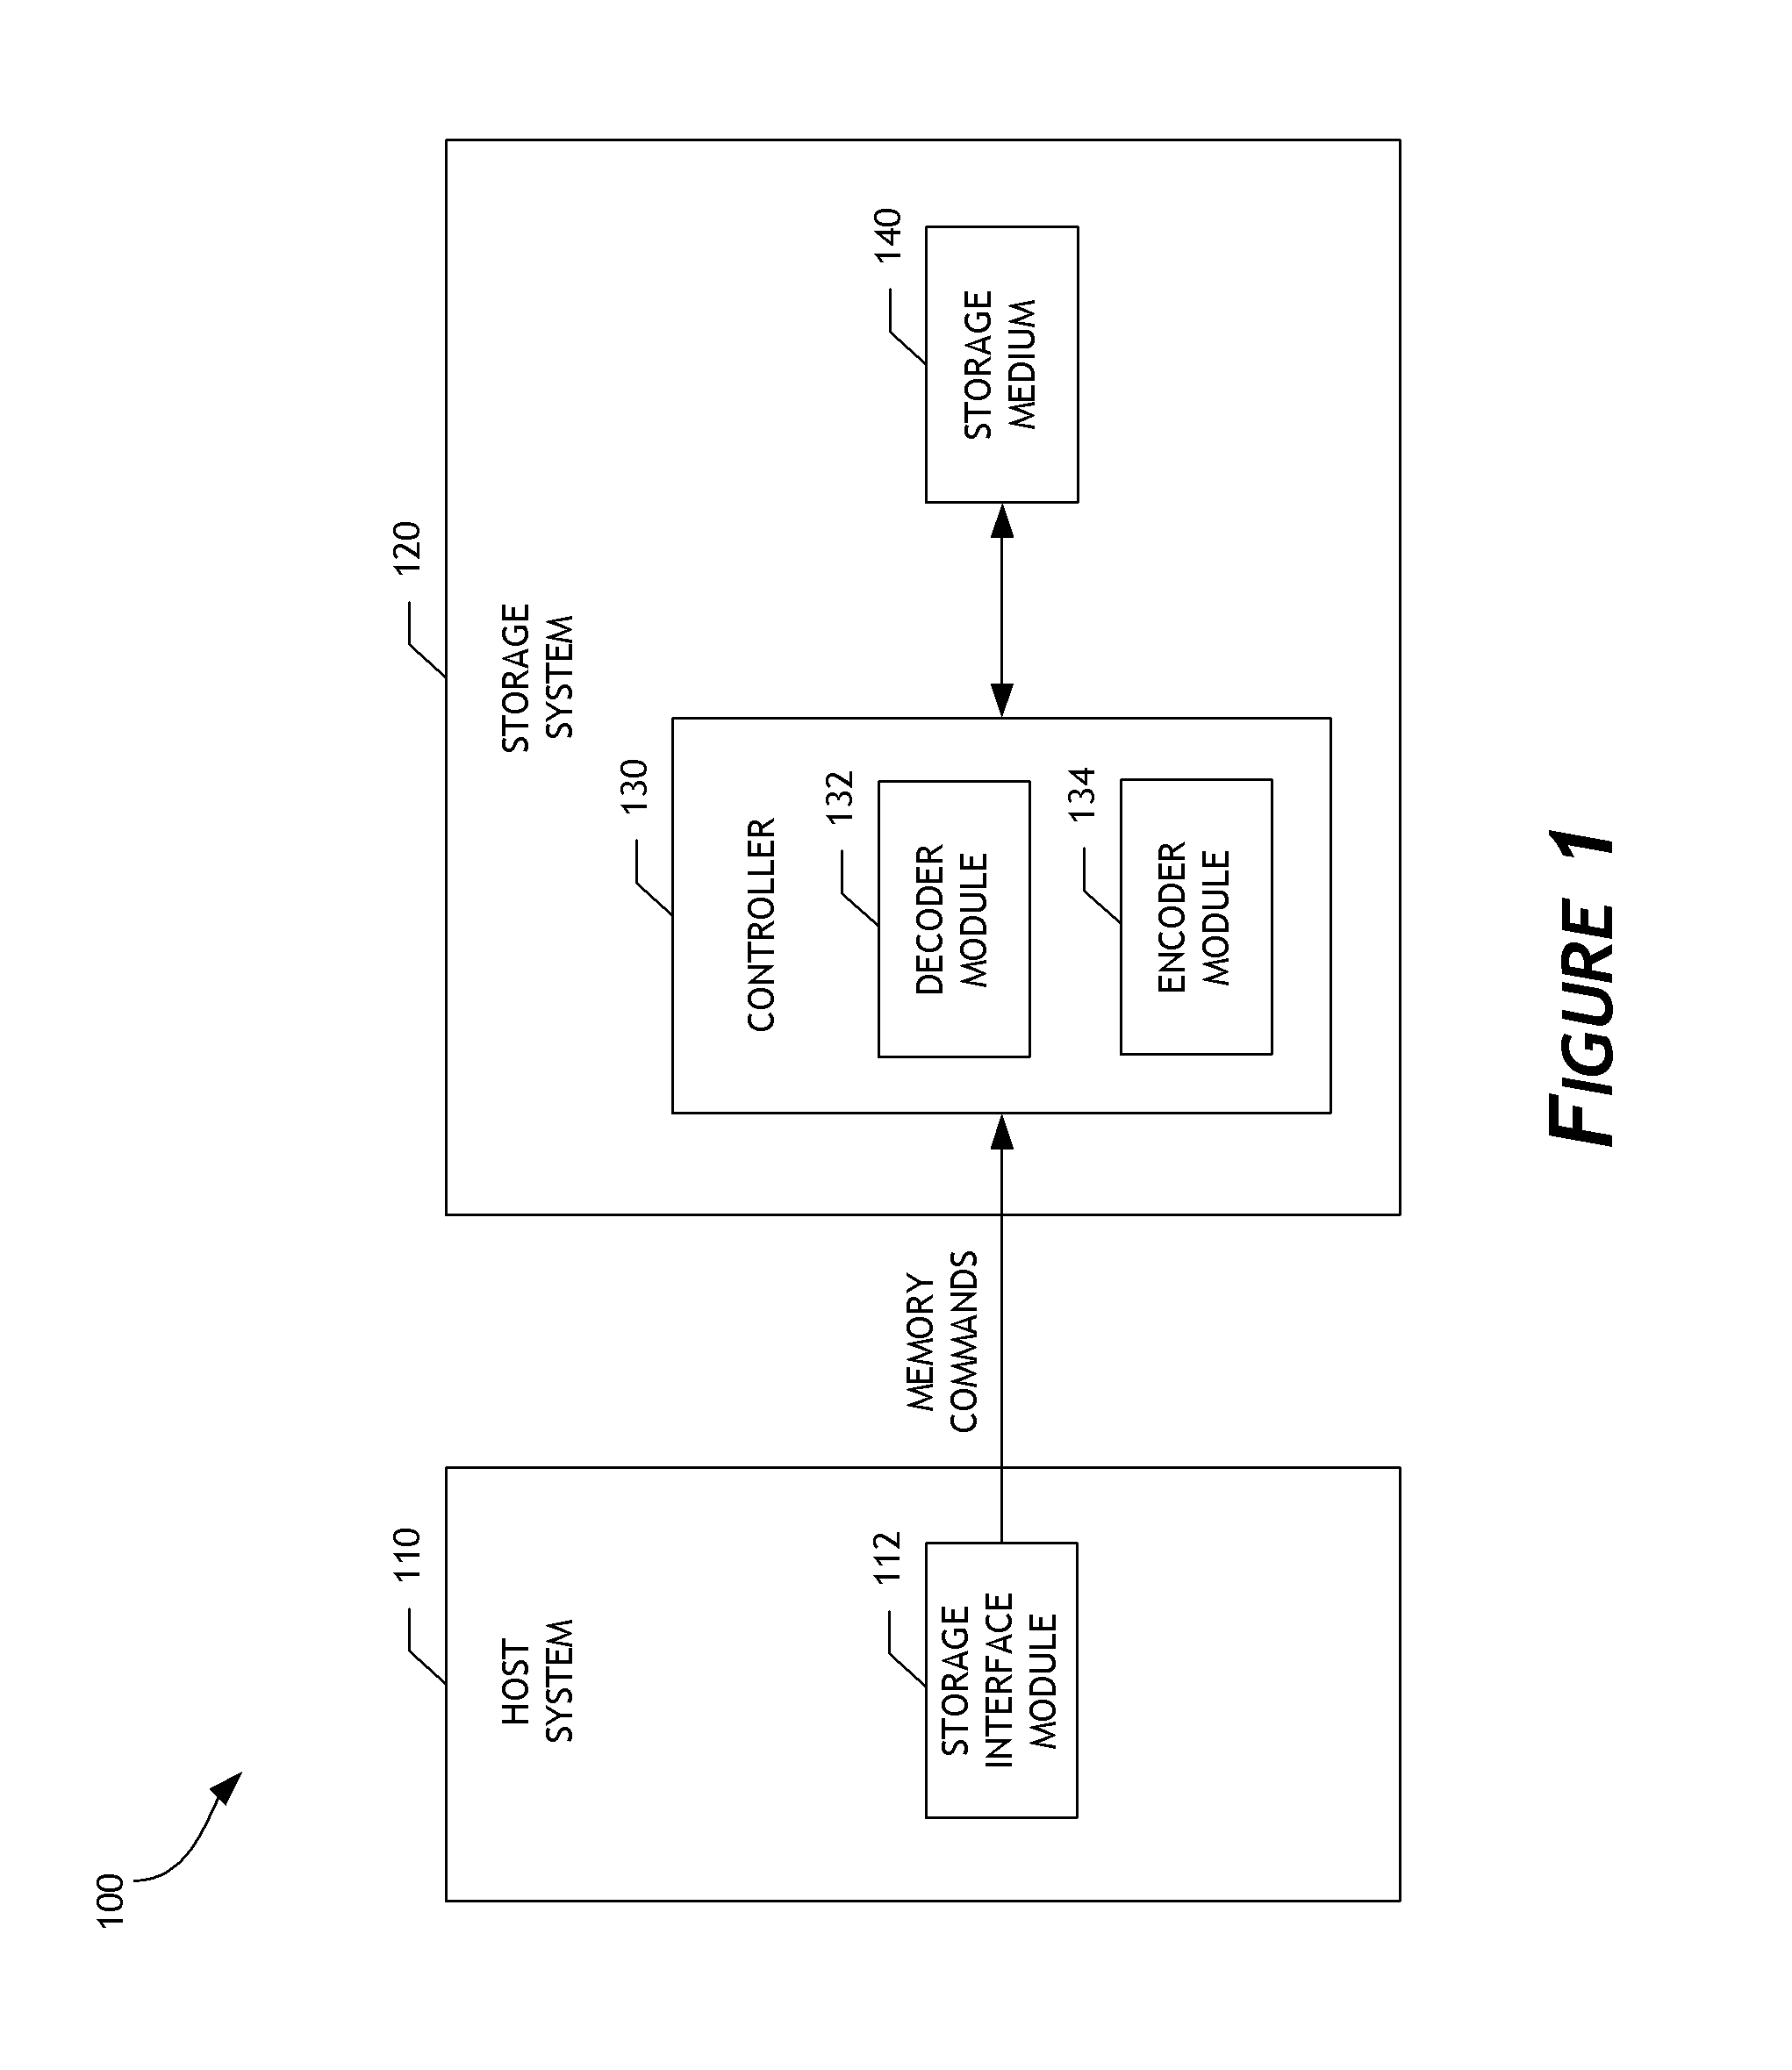 Decoder supporting multiple code rates and code lengths for data storage systems